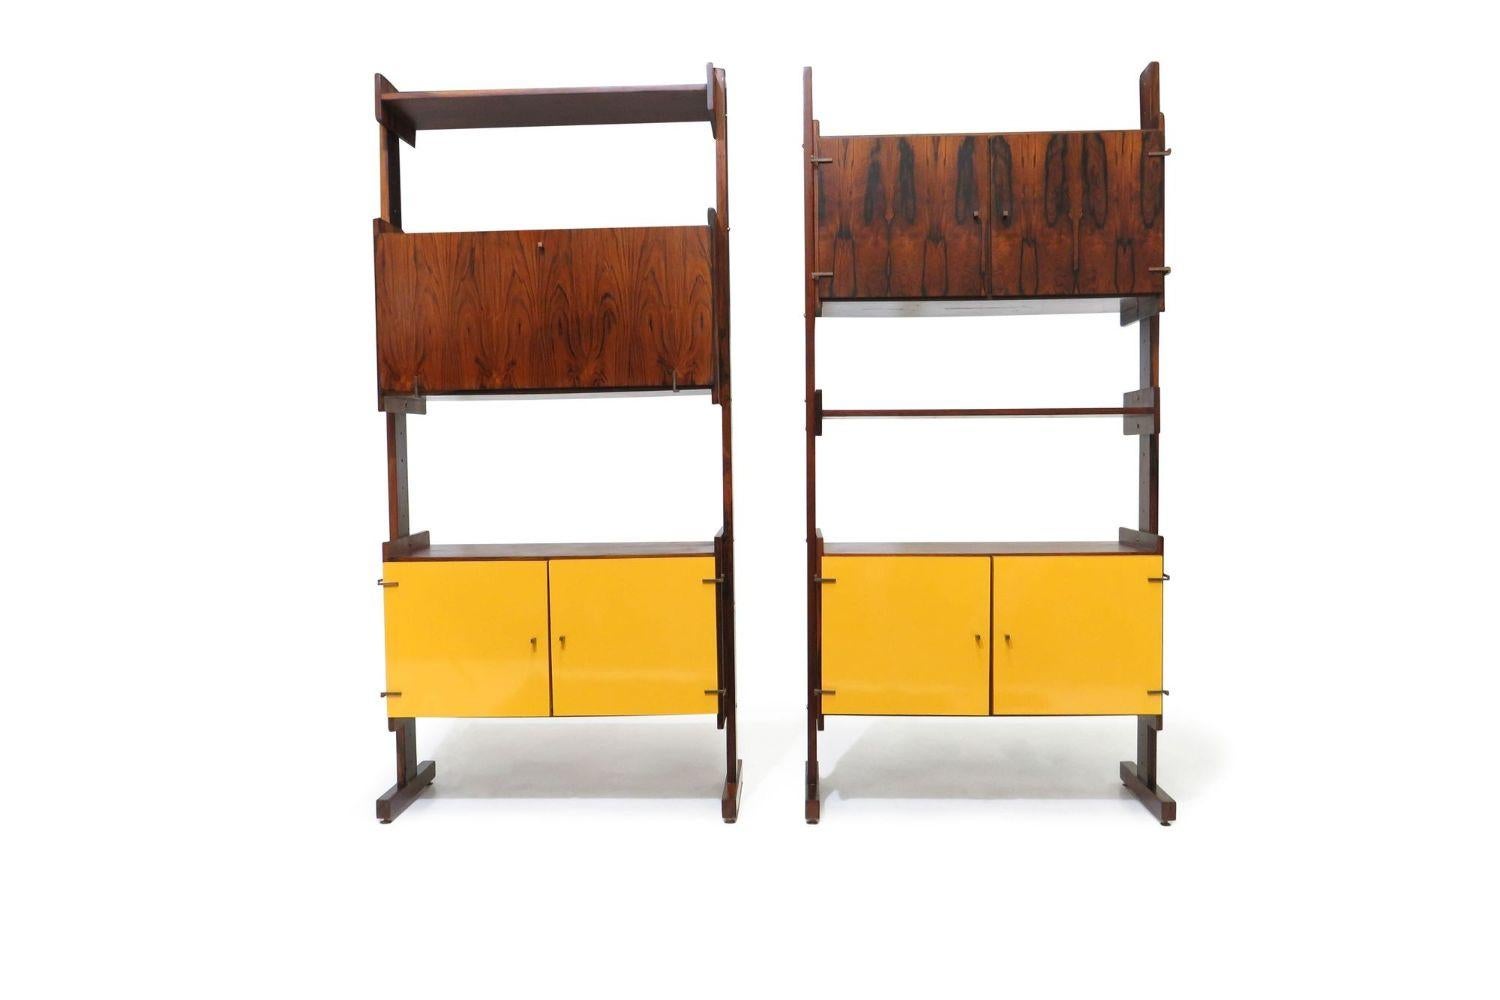 Brazilian rosewood room divider bookcase with adjustable cabinets and shelves with yellow formica front and drop front cabinet. 
Measurements
W 34'' x D 14.75'' x 72''